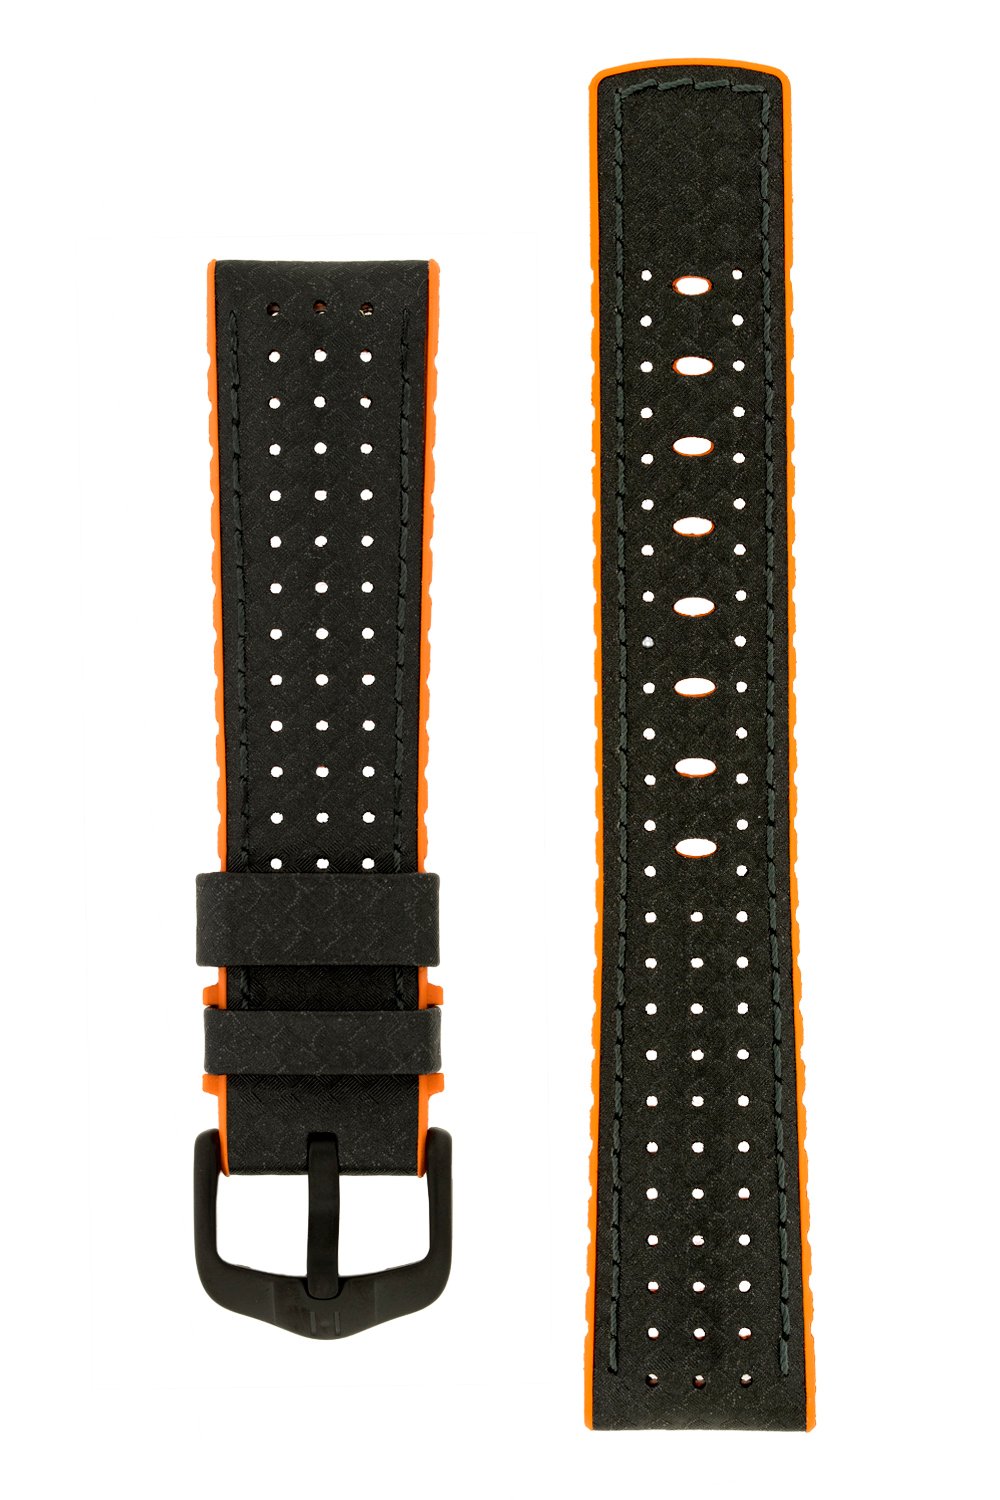 Hirsch AYRTON Carbon Embossed Performance Watch Strap 24mm